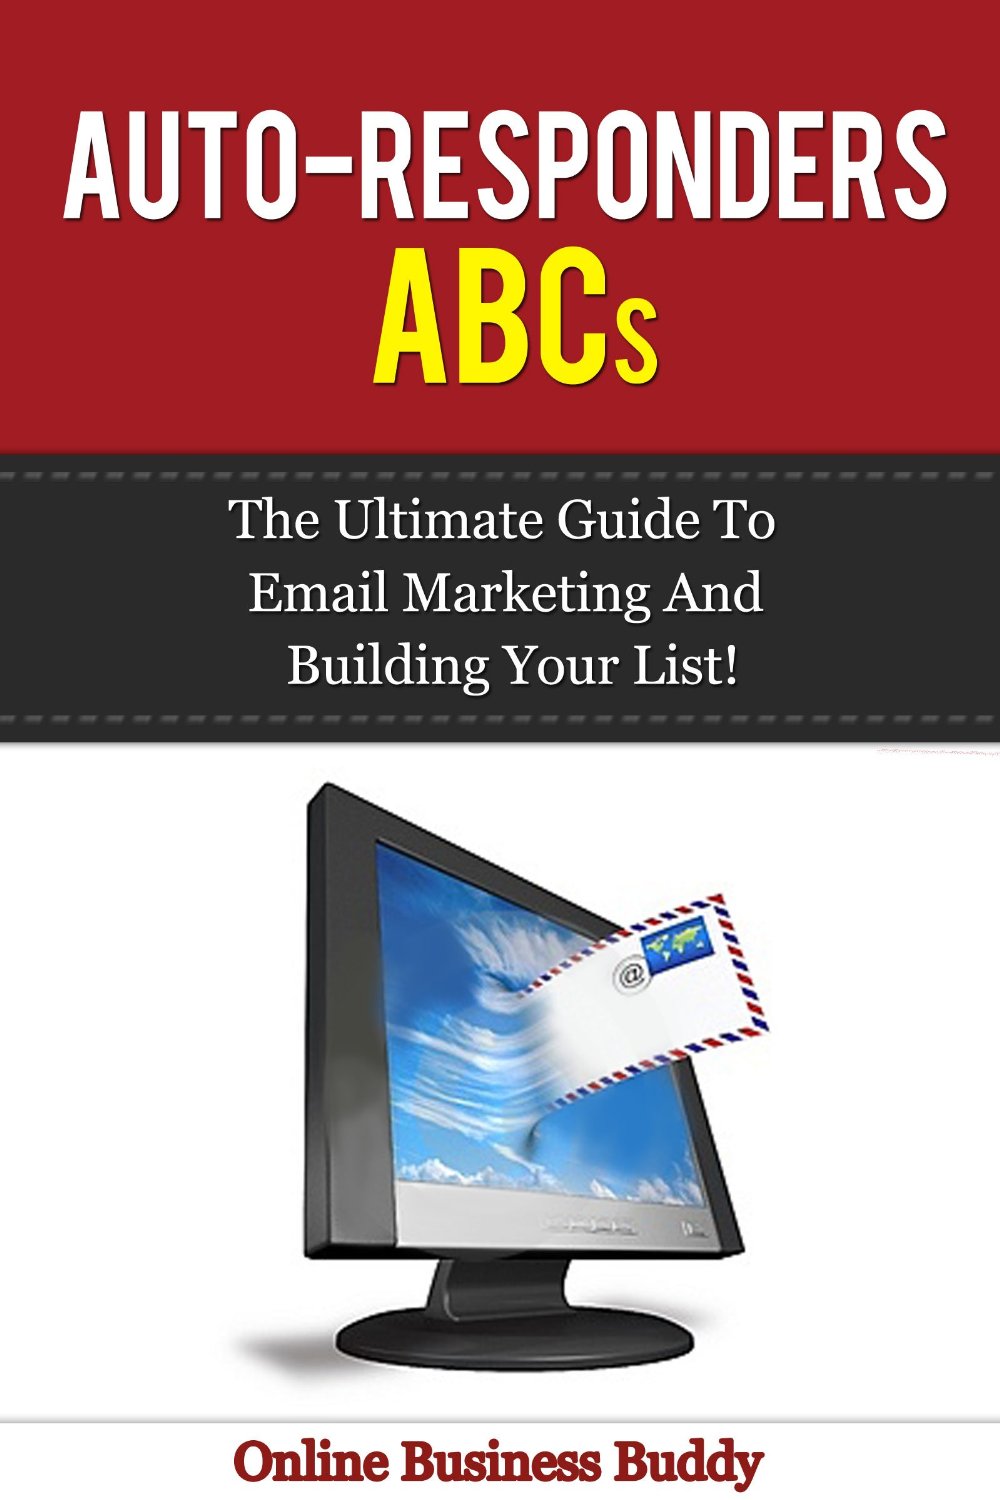 Auto-Responders ABCs: The Ultimate Guide to Email Marketing and building your list! by Simone Lea